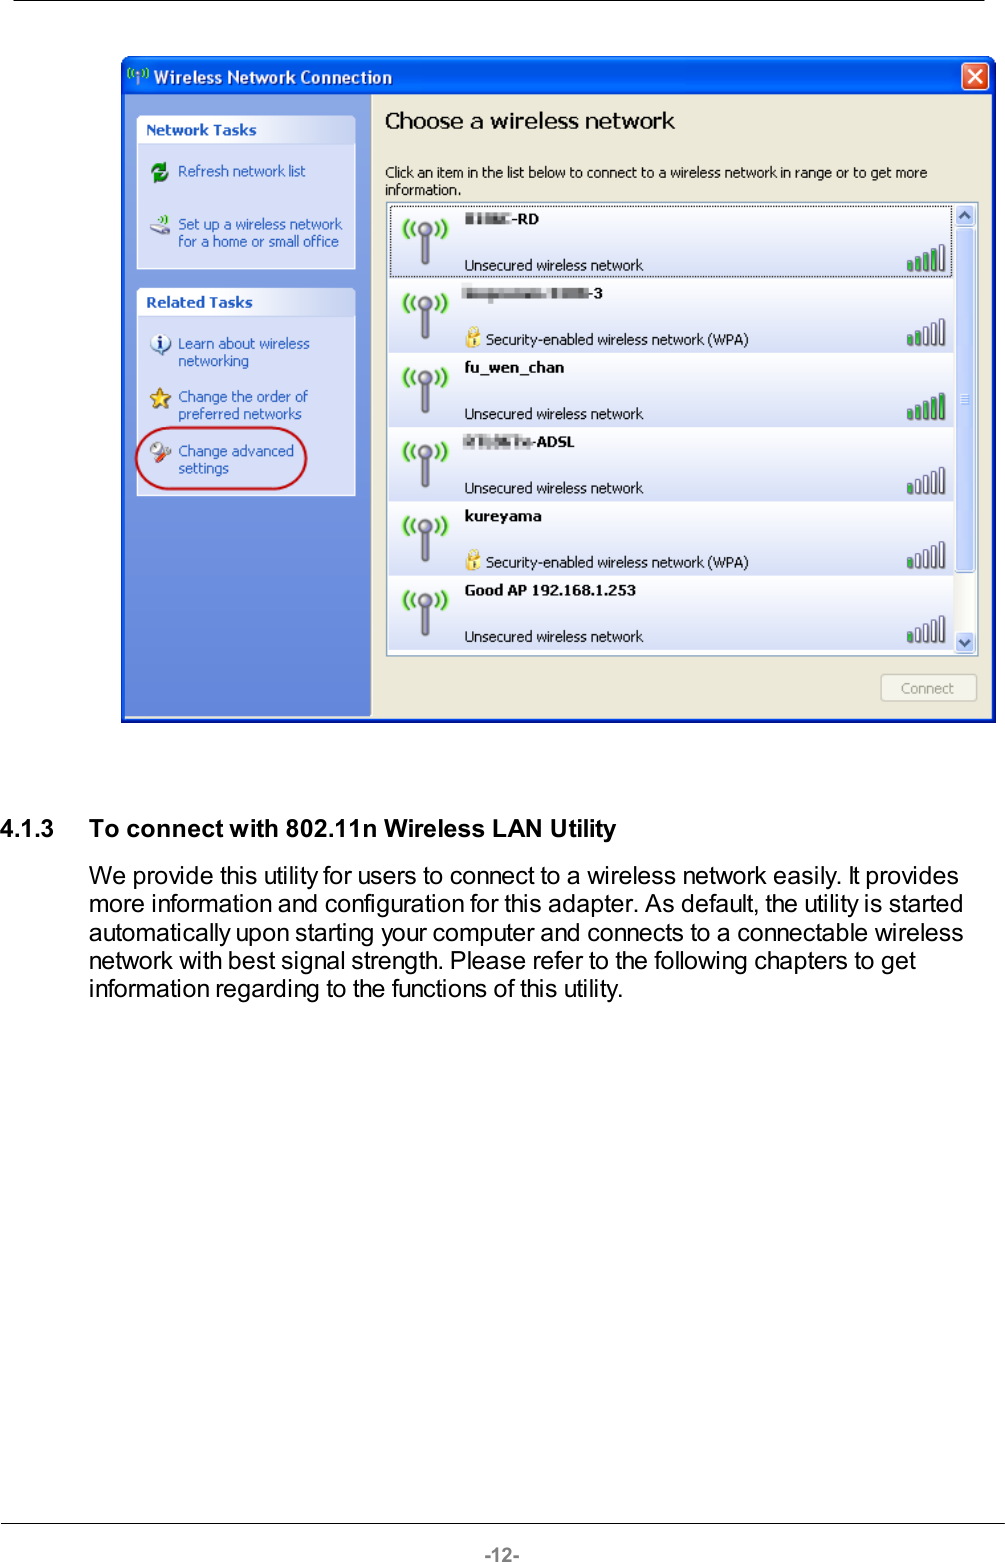 -12-4.1.3 To connect with 802.11n Wireless LAN UtilityWe provide this utility for users to connect to a wireless network easily. It providesmore information and configuration for this adapter. As default, the utility is startedautomatically upon starting your computer and connects to a connectable wirelessnetwork with best signal strength. Please refer to the following chapters to getinformation regarding to the functions of this utility.